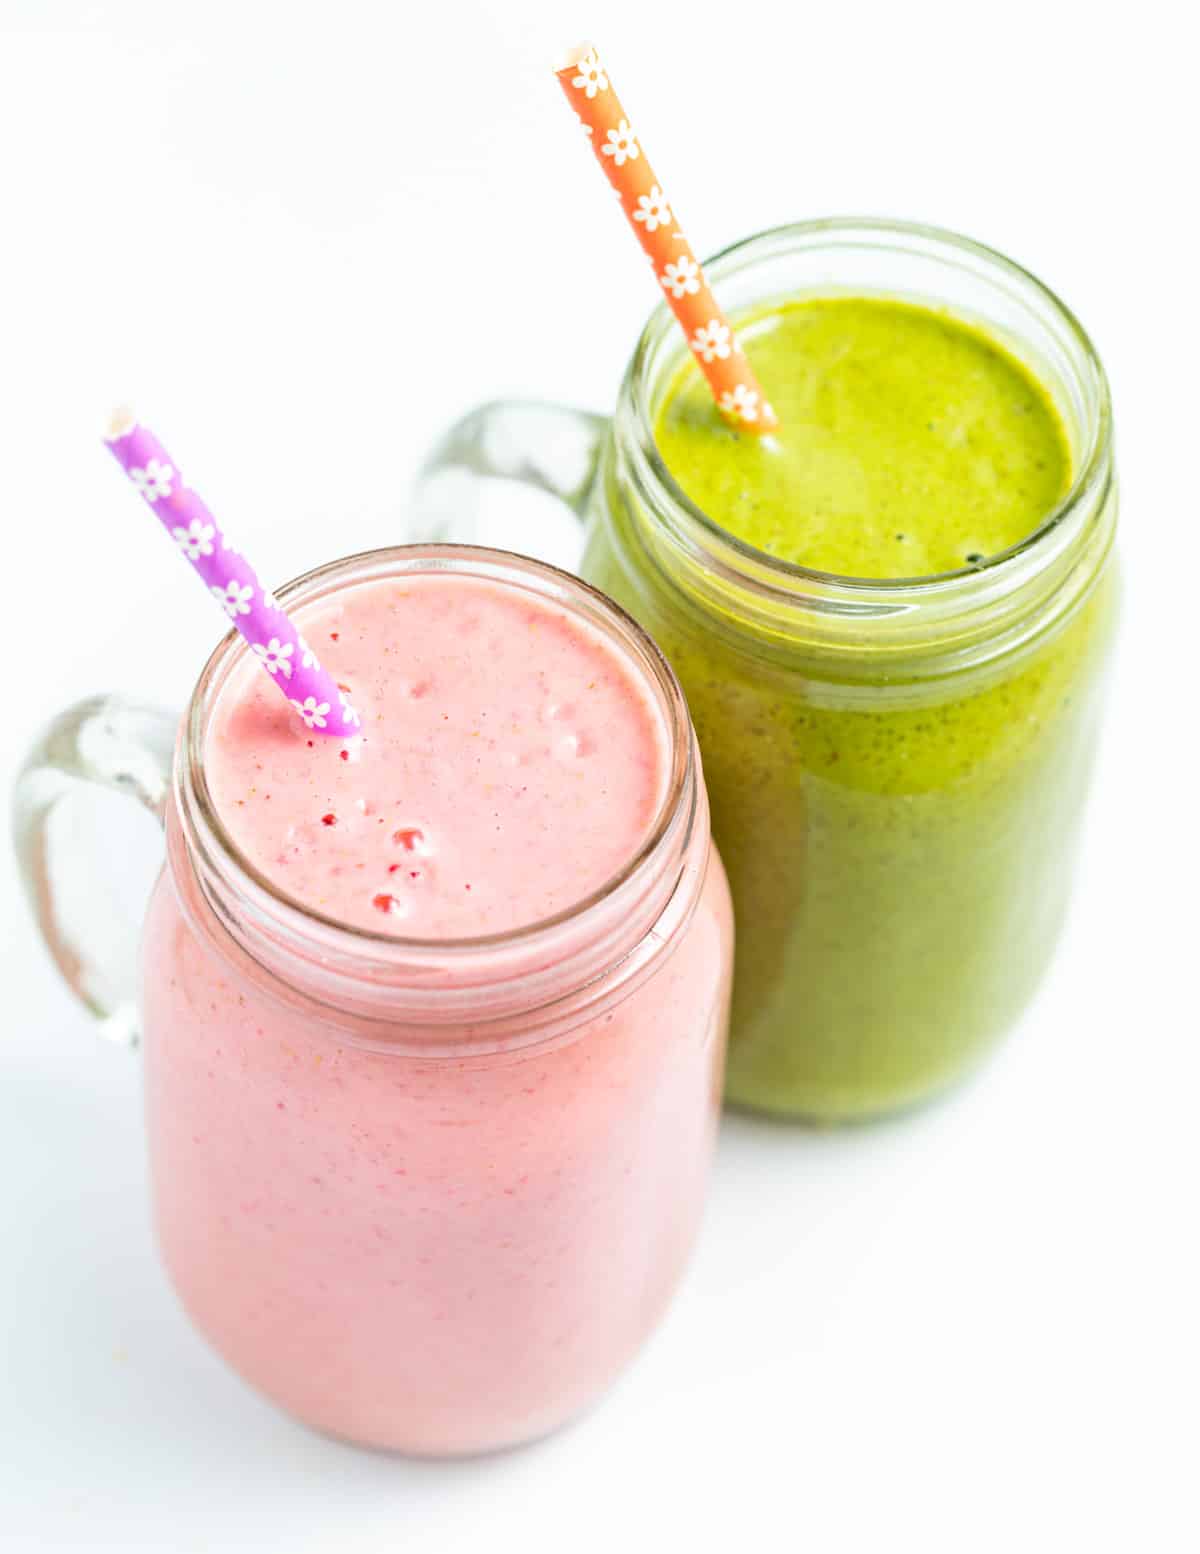 2 vegan smoothies. One pink, one green. 